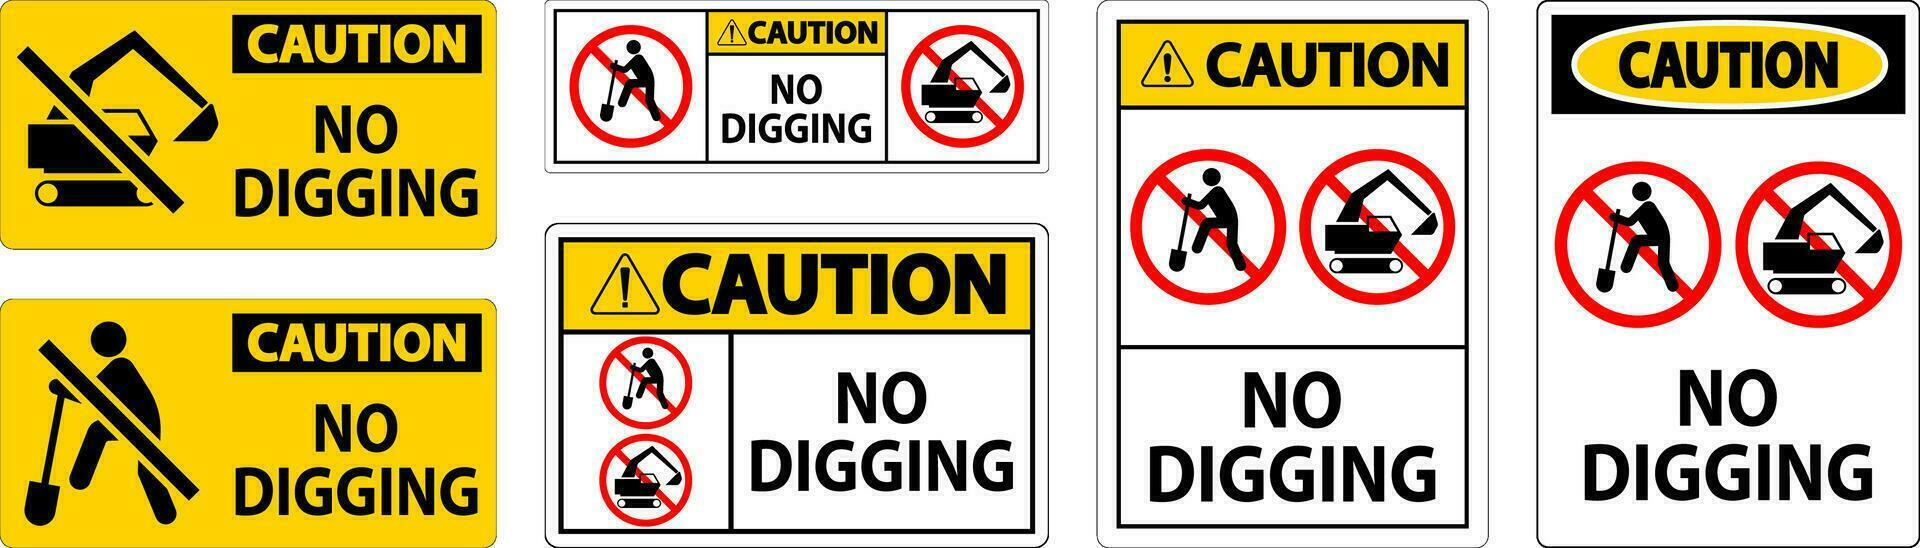 Caution Sign, No Digging Sign vector